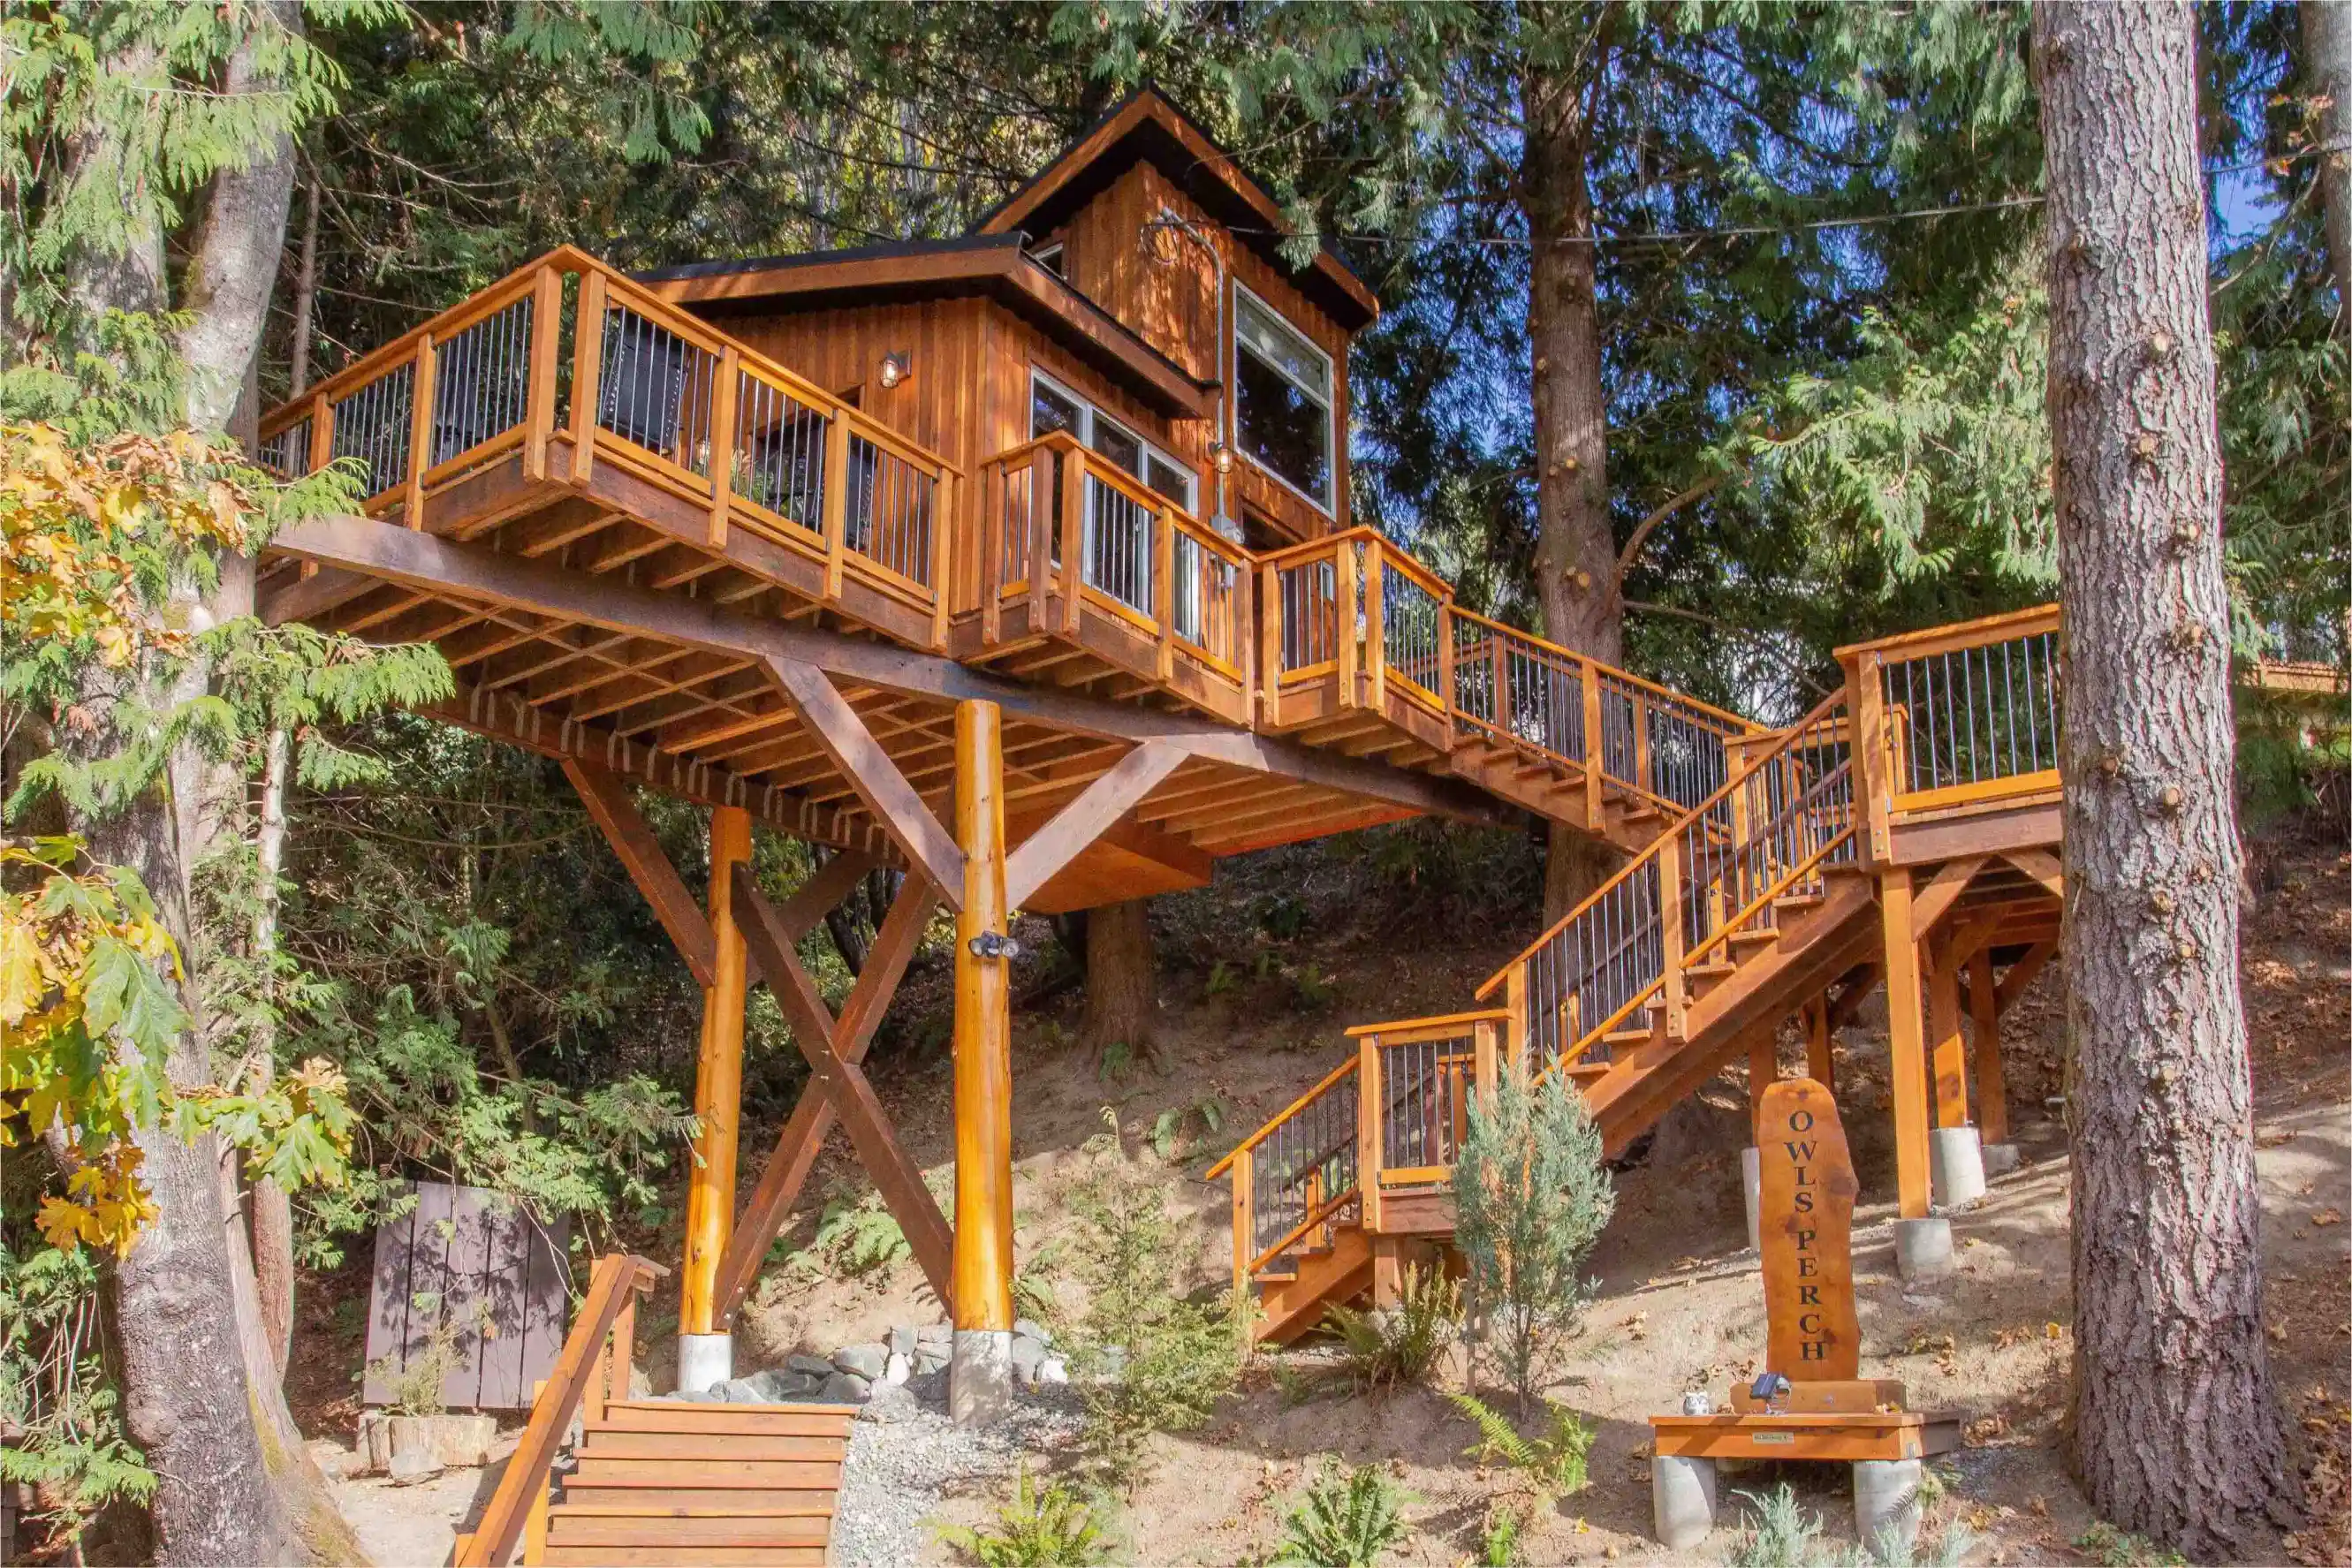 Wooden stairs lead up to a large treehouse. A sign reading "Owl's Perch" greets you at the entrance. 